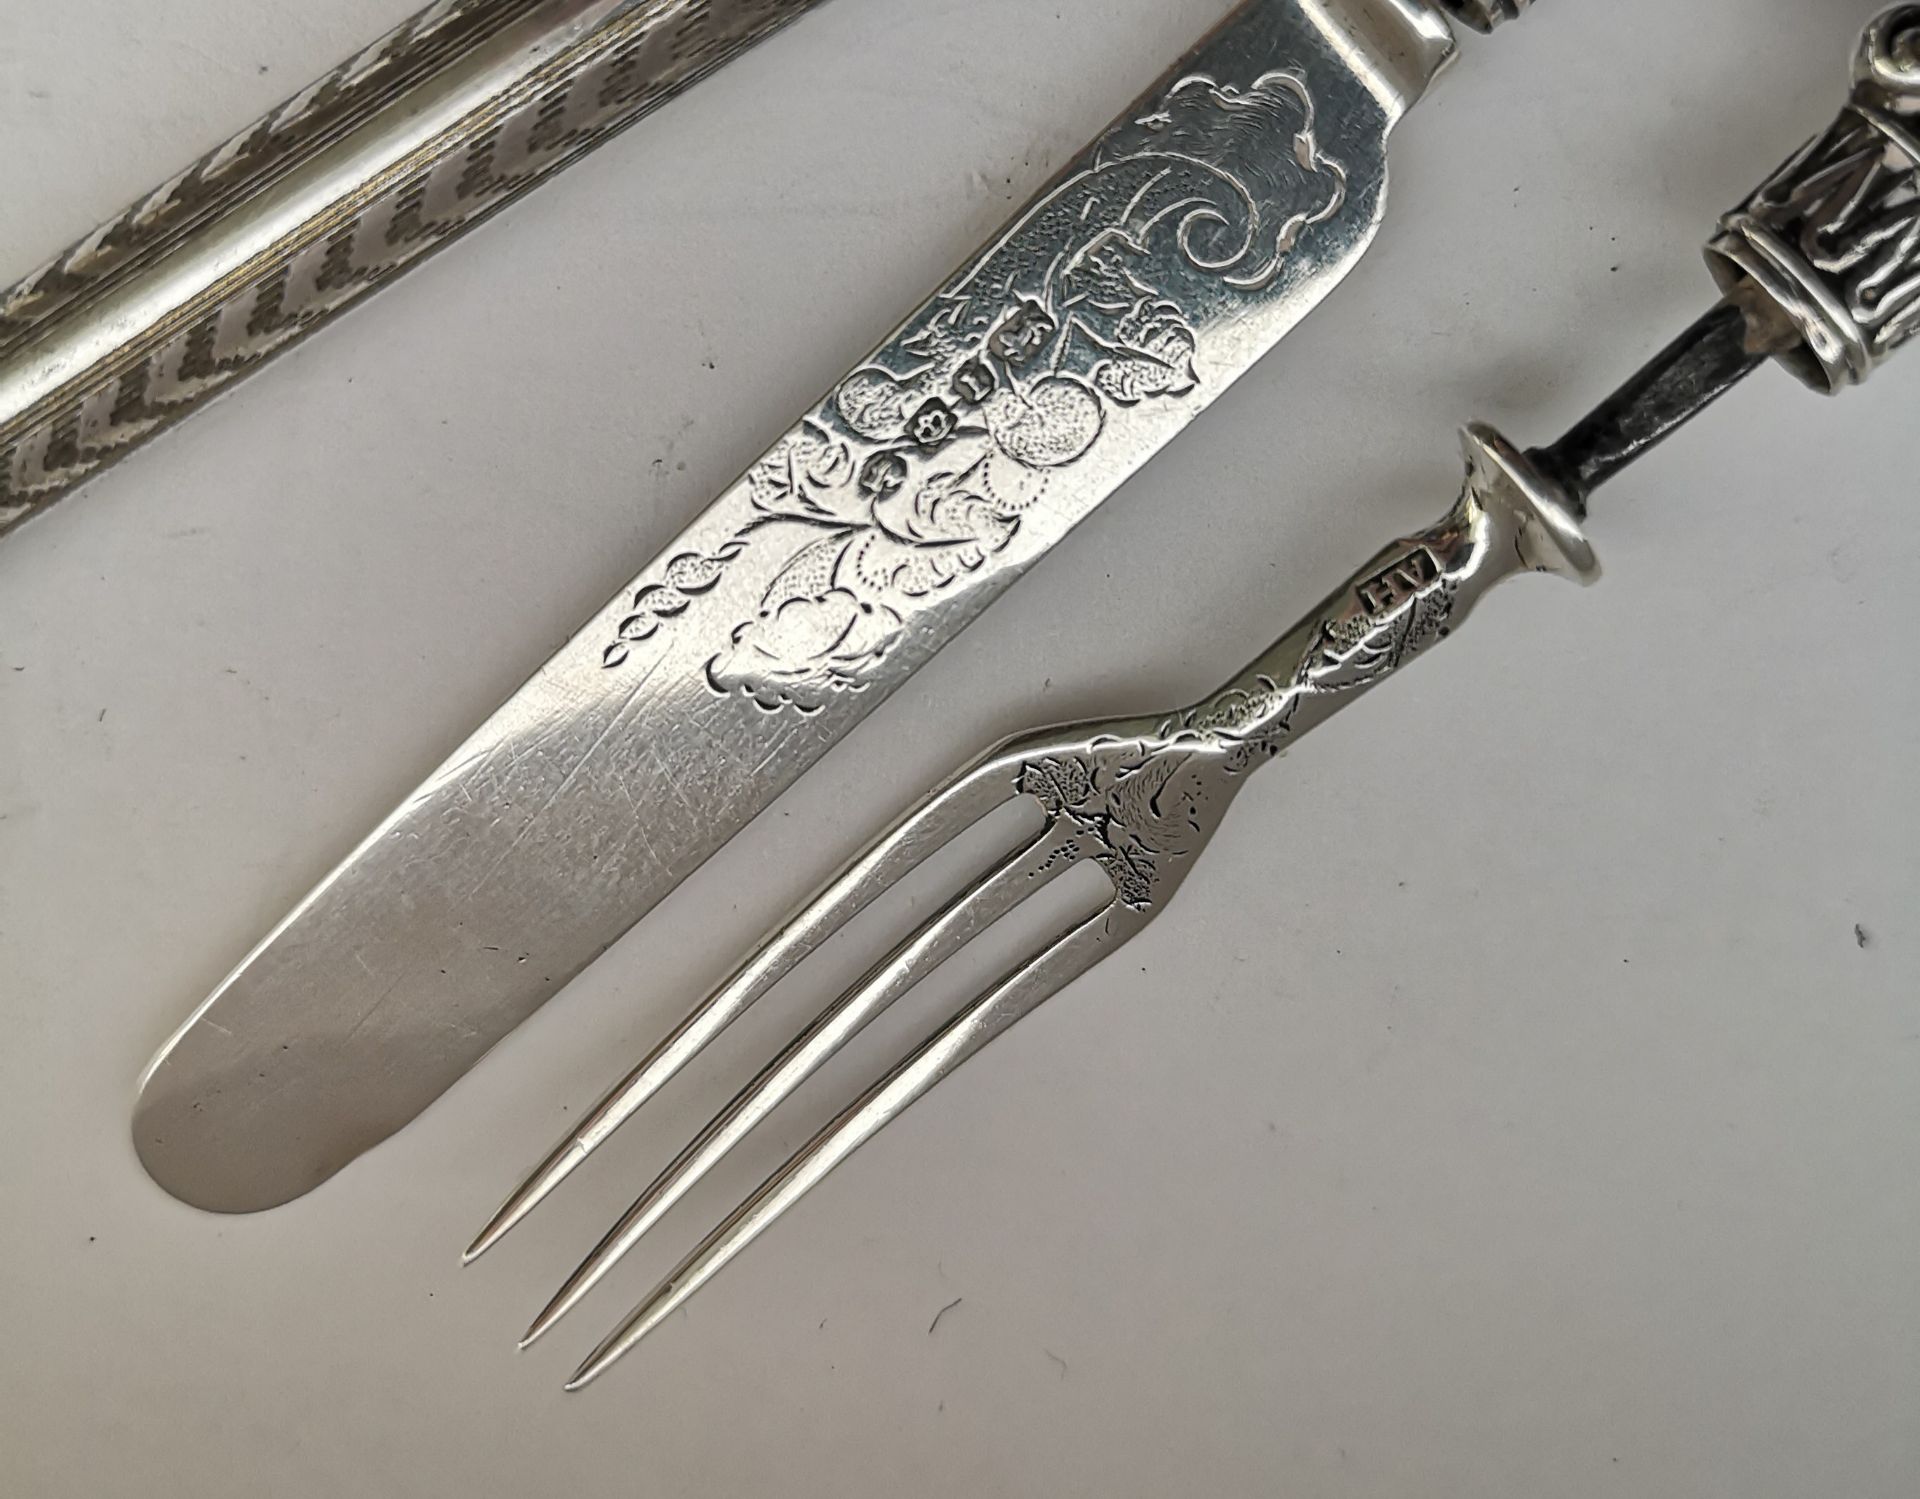 Group Of Pens And A Silver Knife And Fork - Image 2 of 2